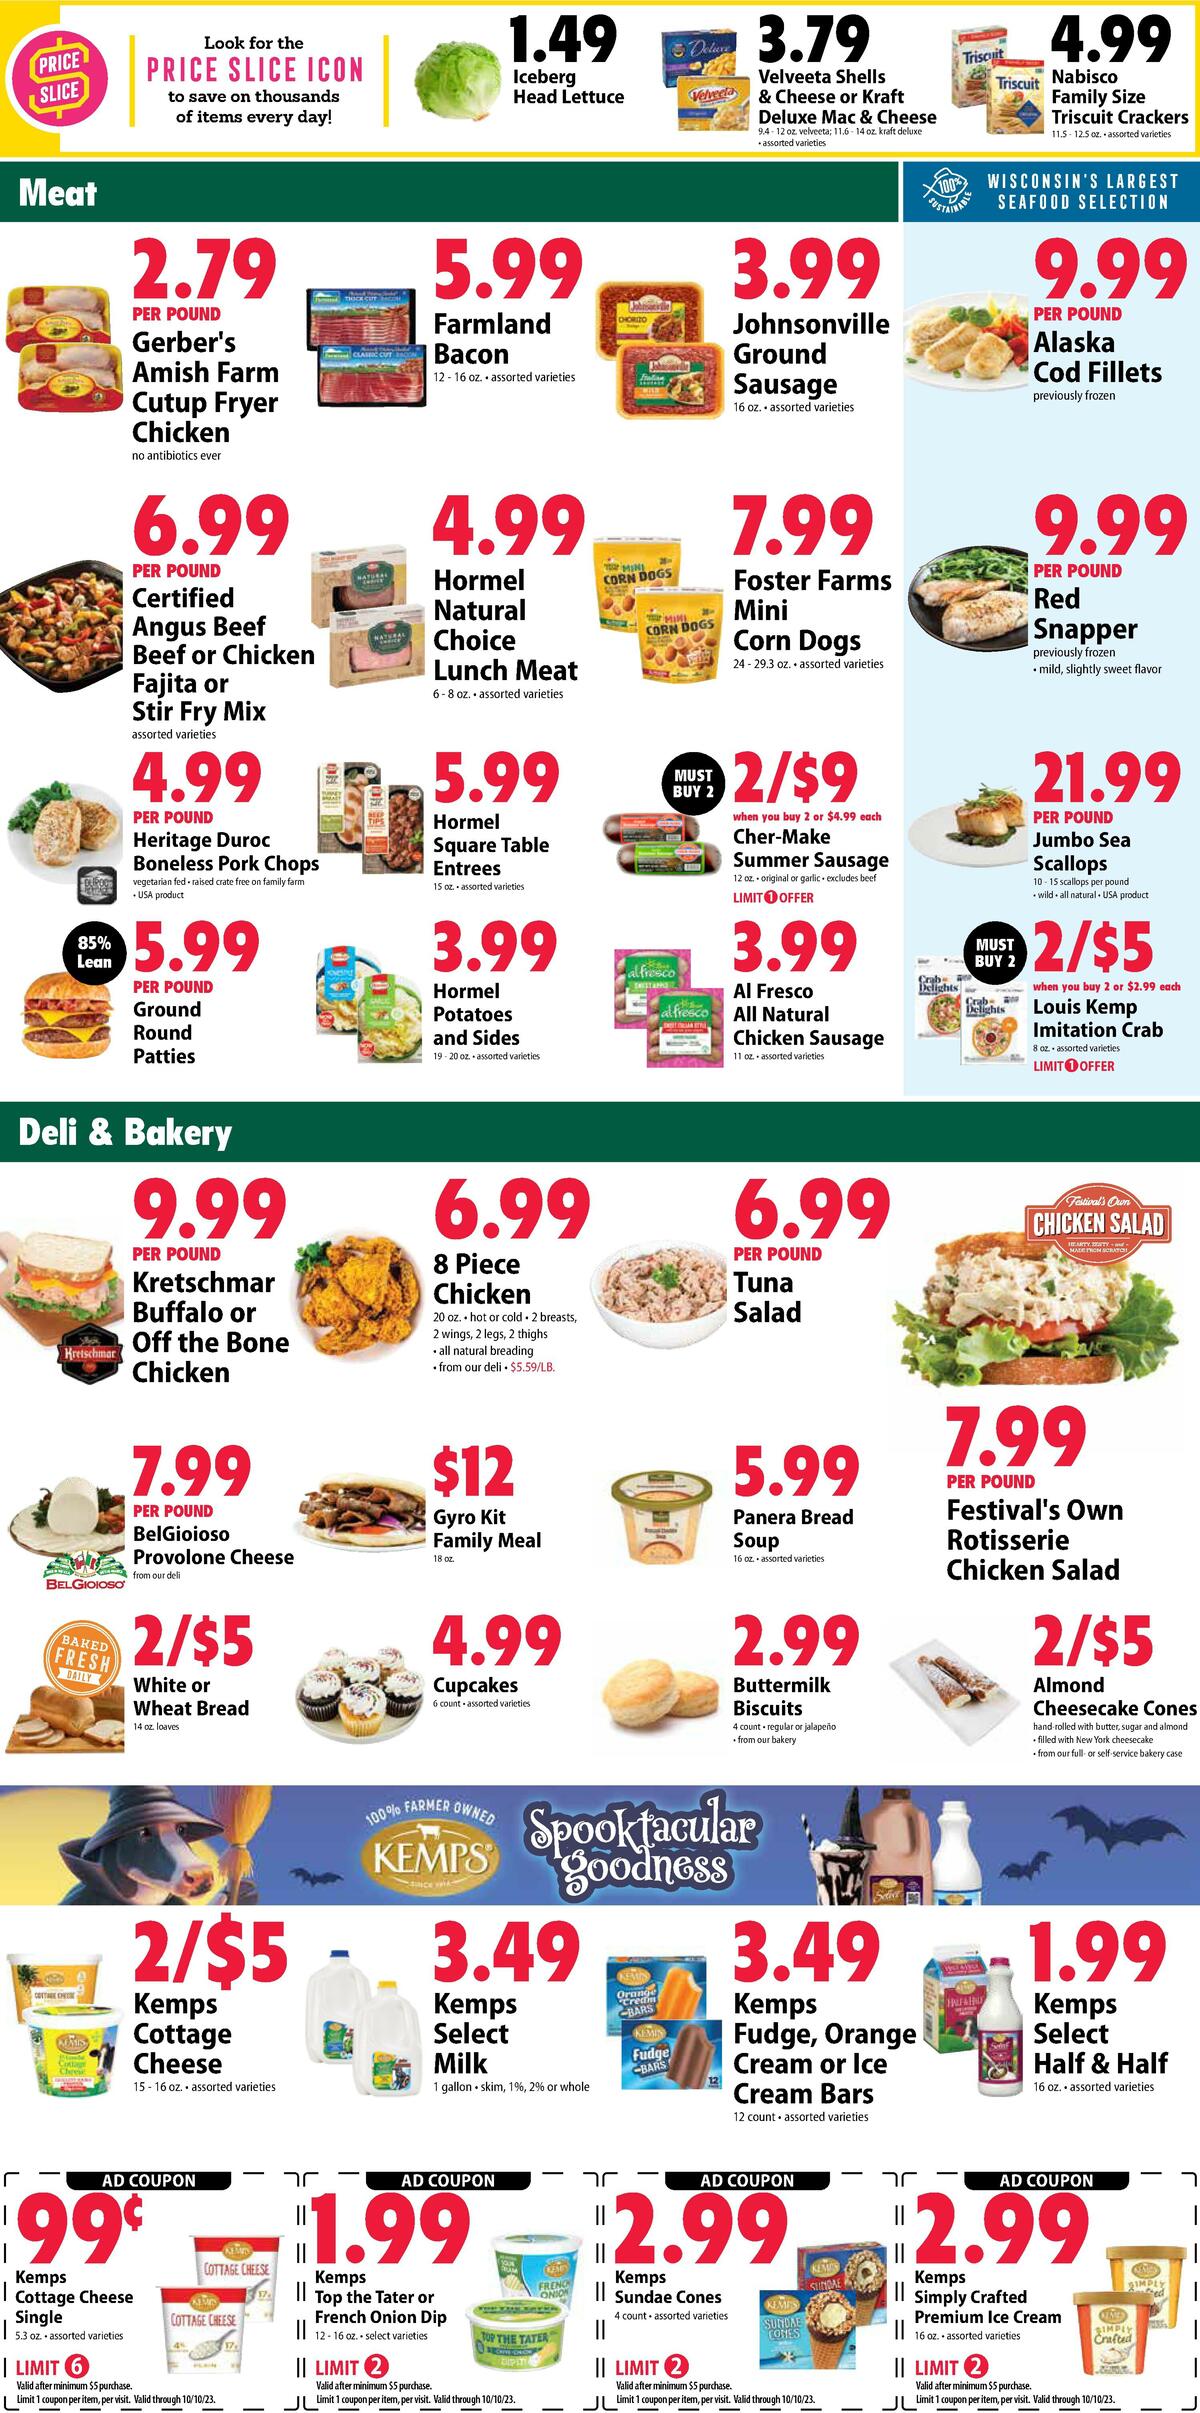 Festival Foods Weekly Ad from October 4